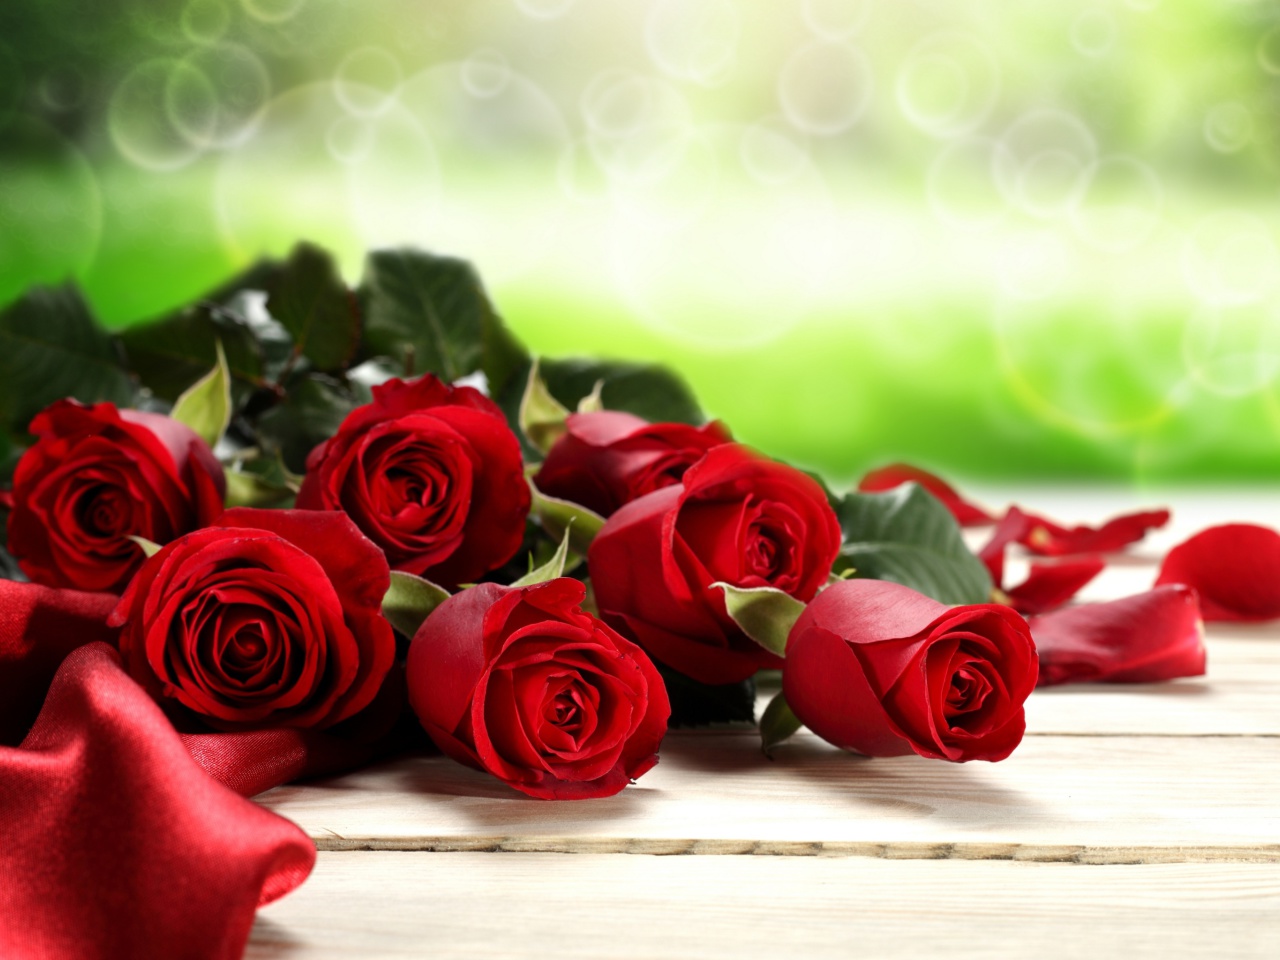 Red Roses for Valentines Day wallpaper 1280x960